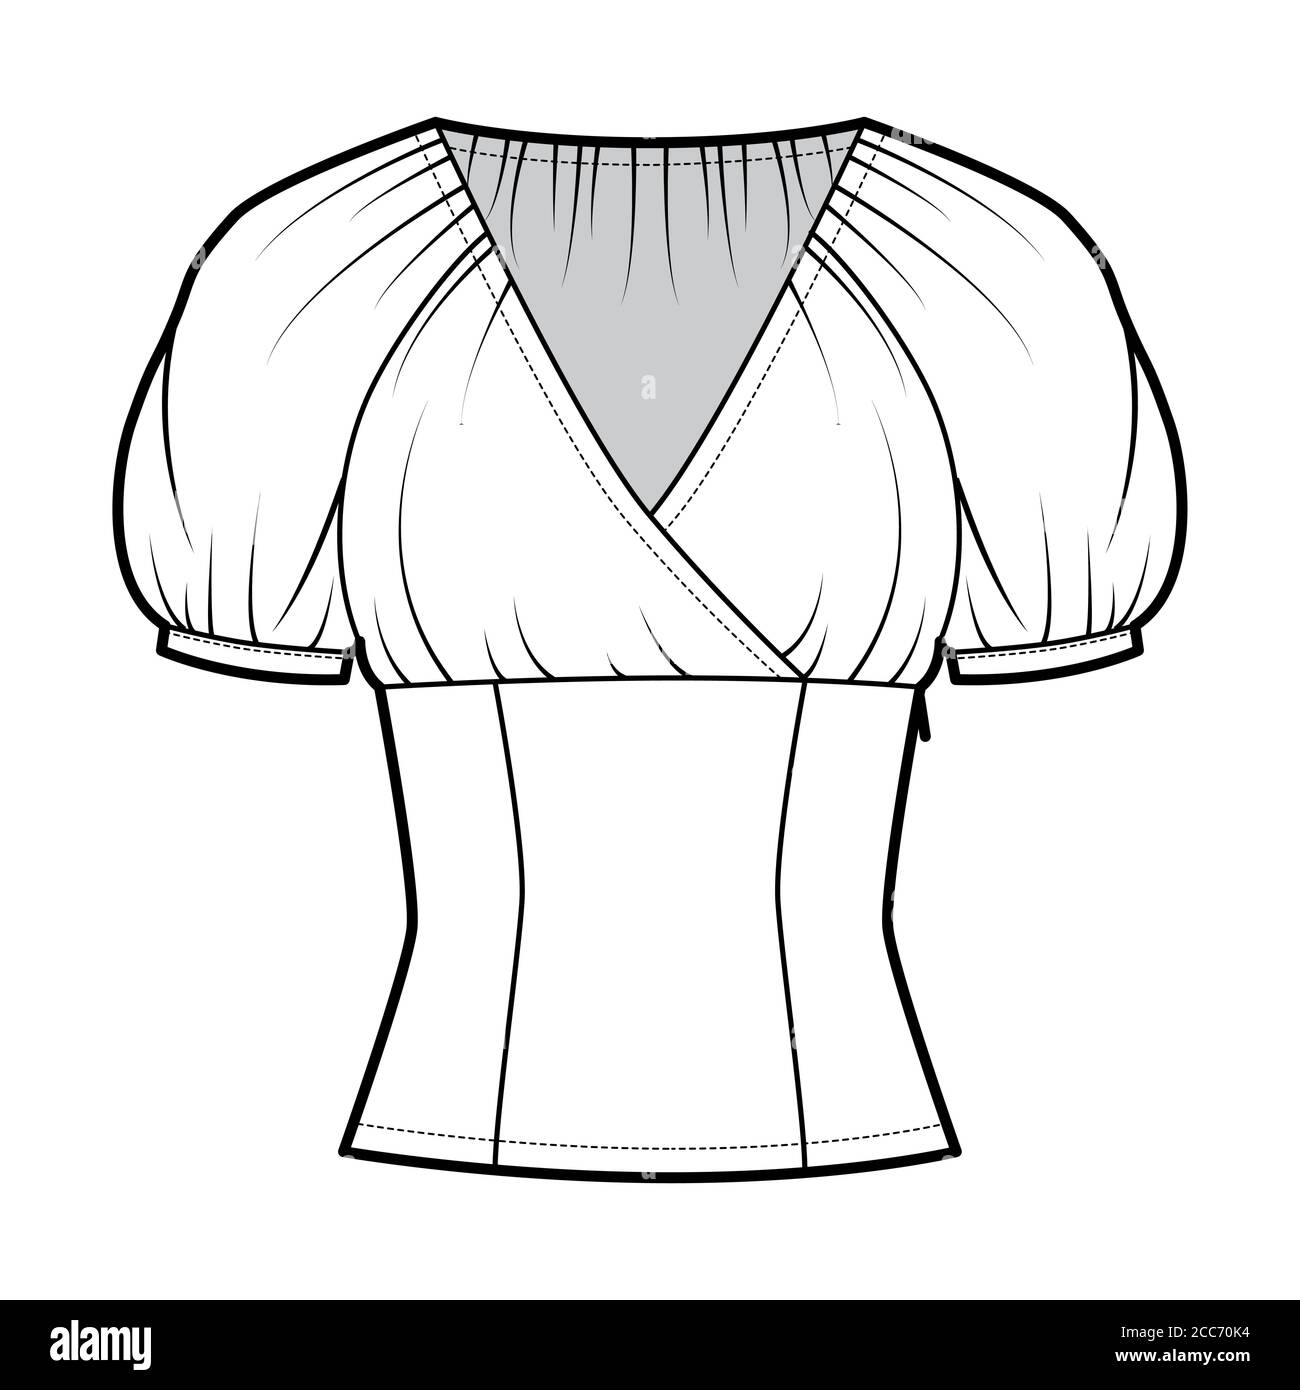 Fitted top technical fashion illustration with surplice neck, elasticated puffed short sleeves, side zip fastening. Flat apparel blouse template front, white color. Women men unisex shirt CAD mockup Stock Vector